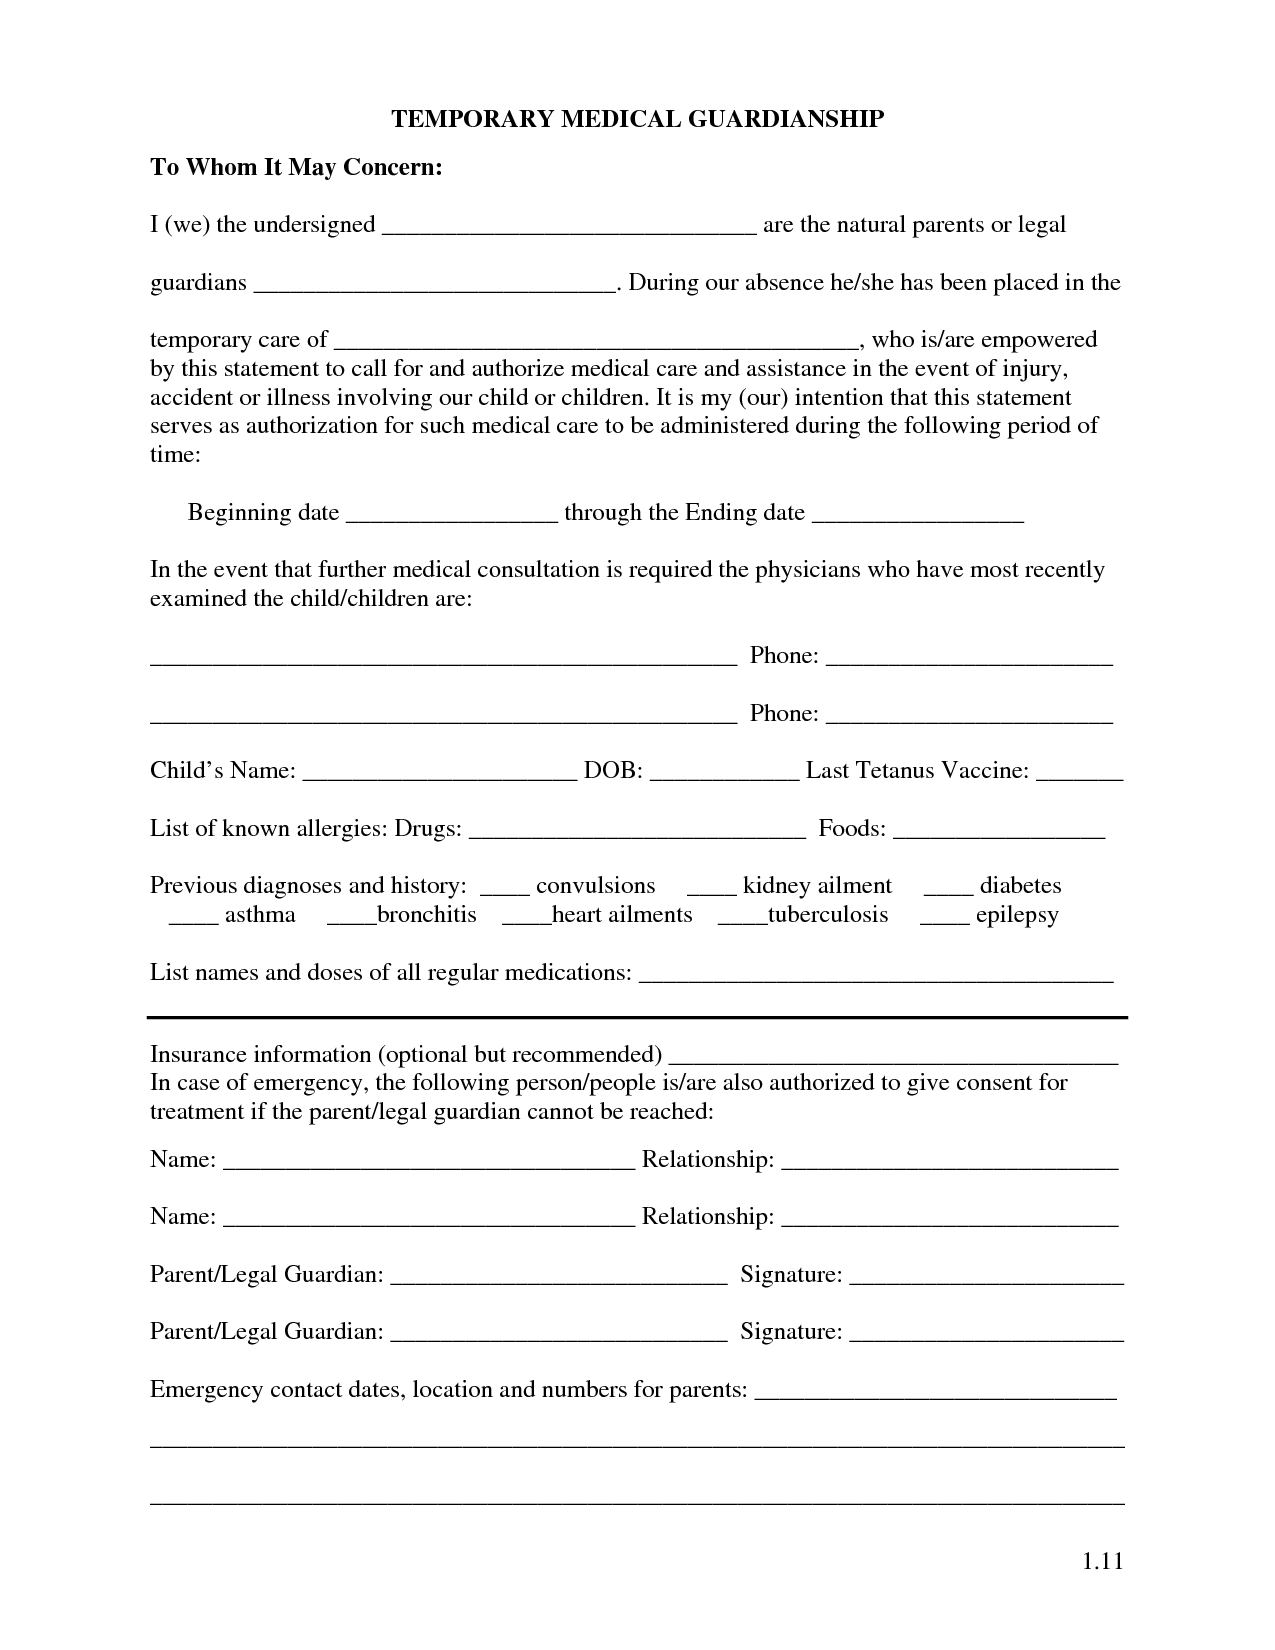 free guardianship papers to print out